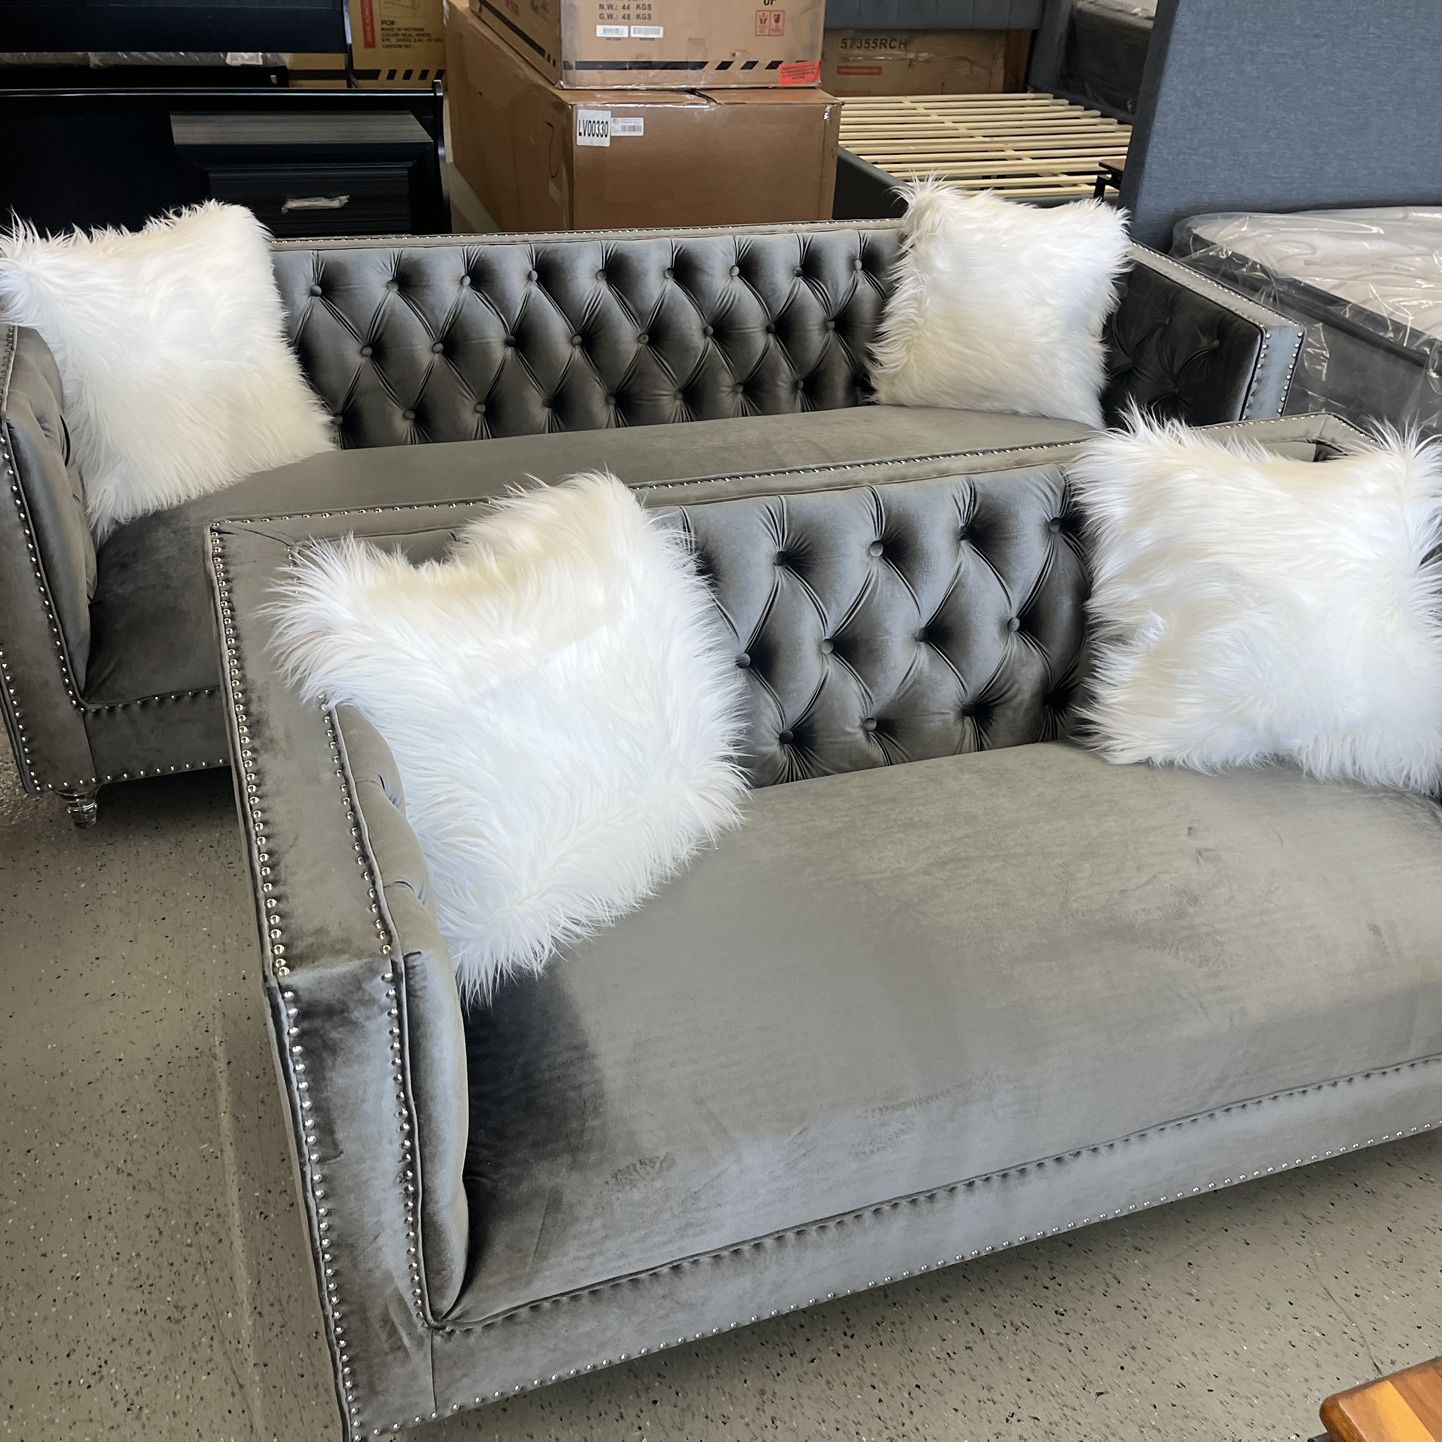 Furniture Sofa, Sectional Chair, Recliner, Couch